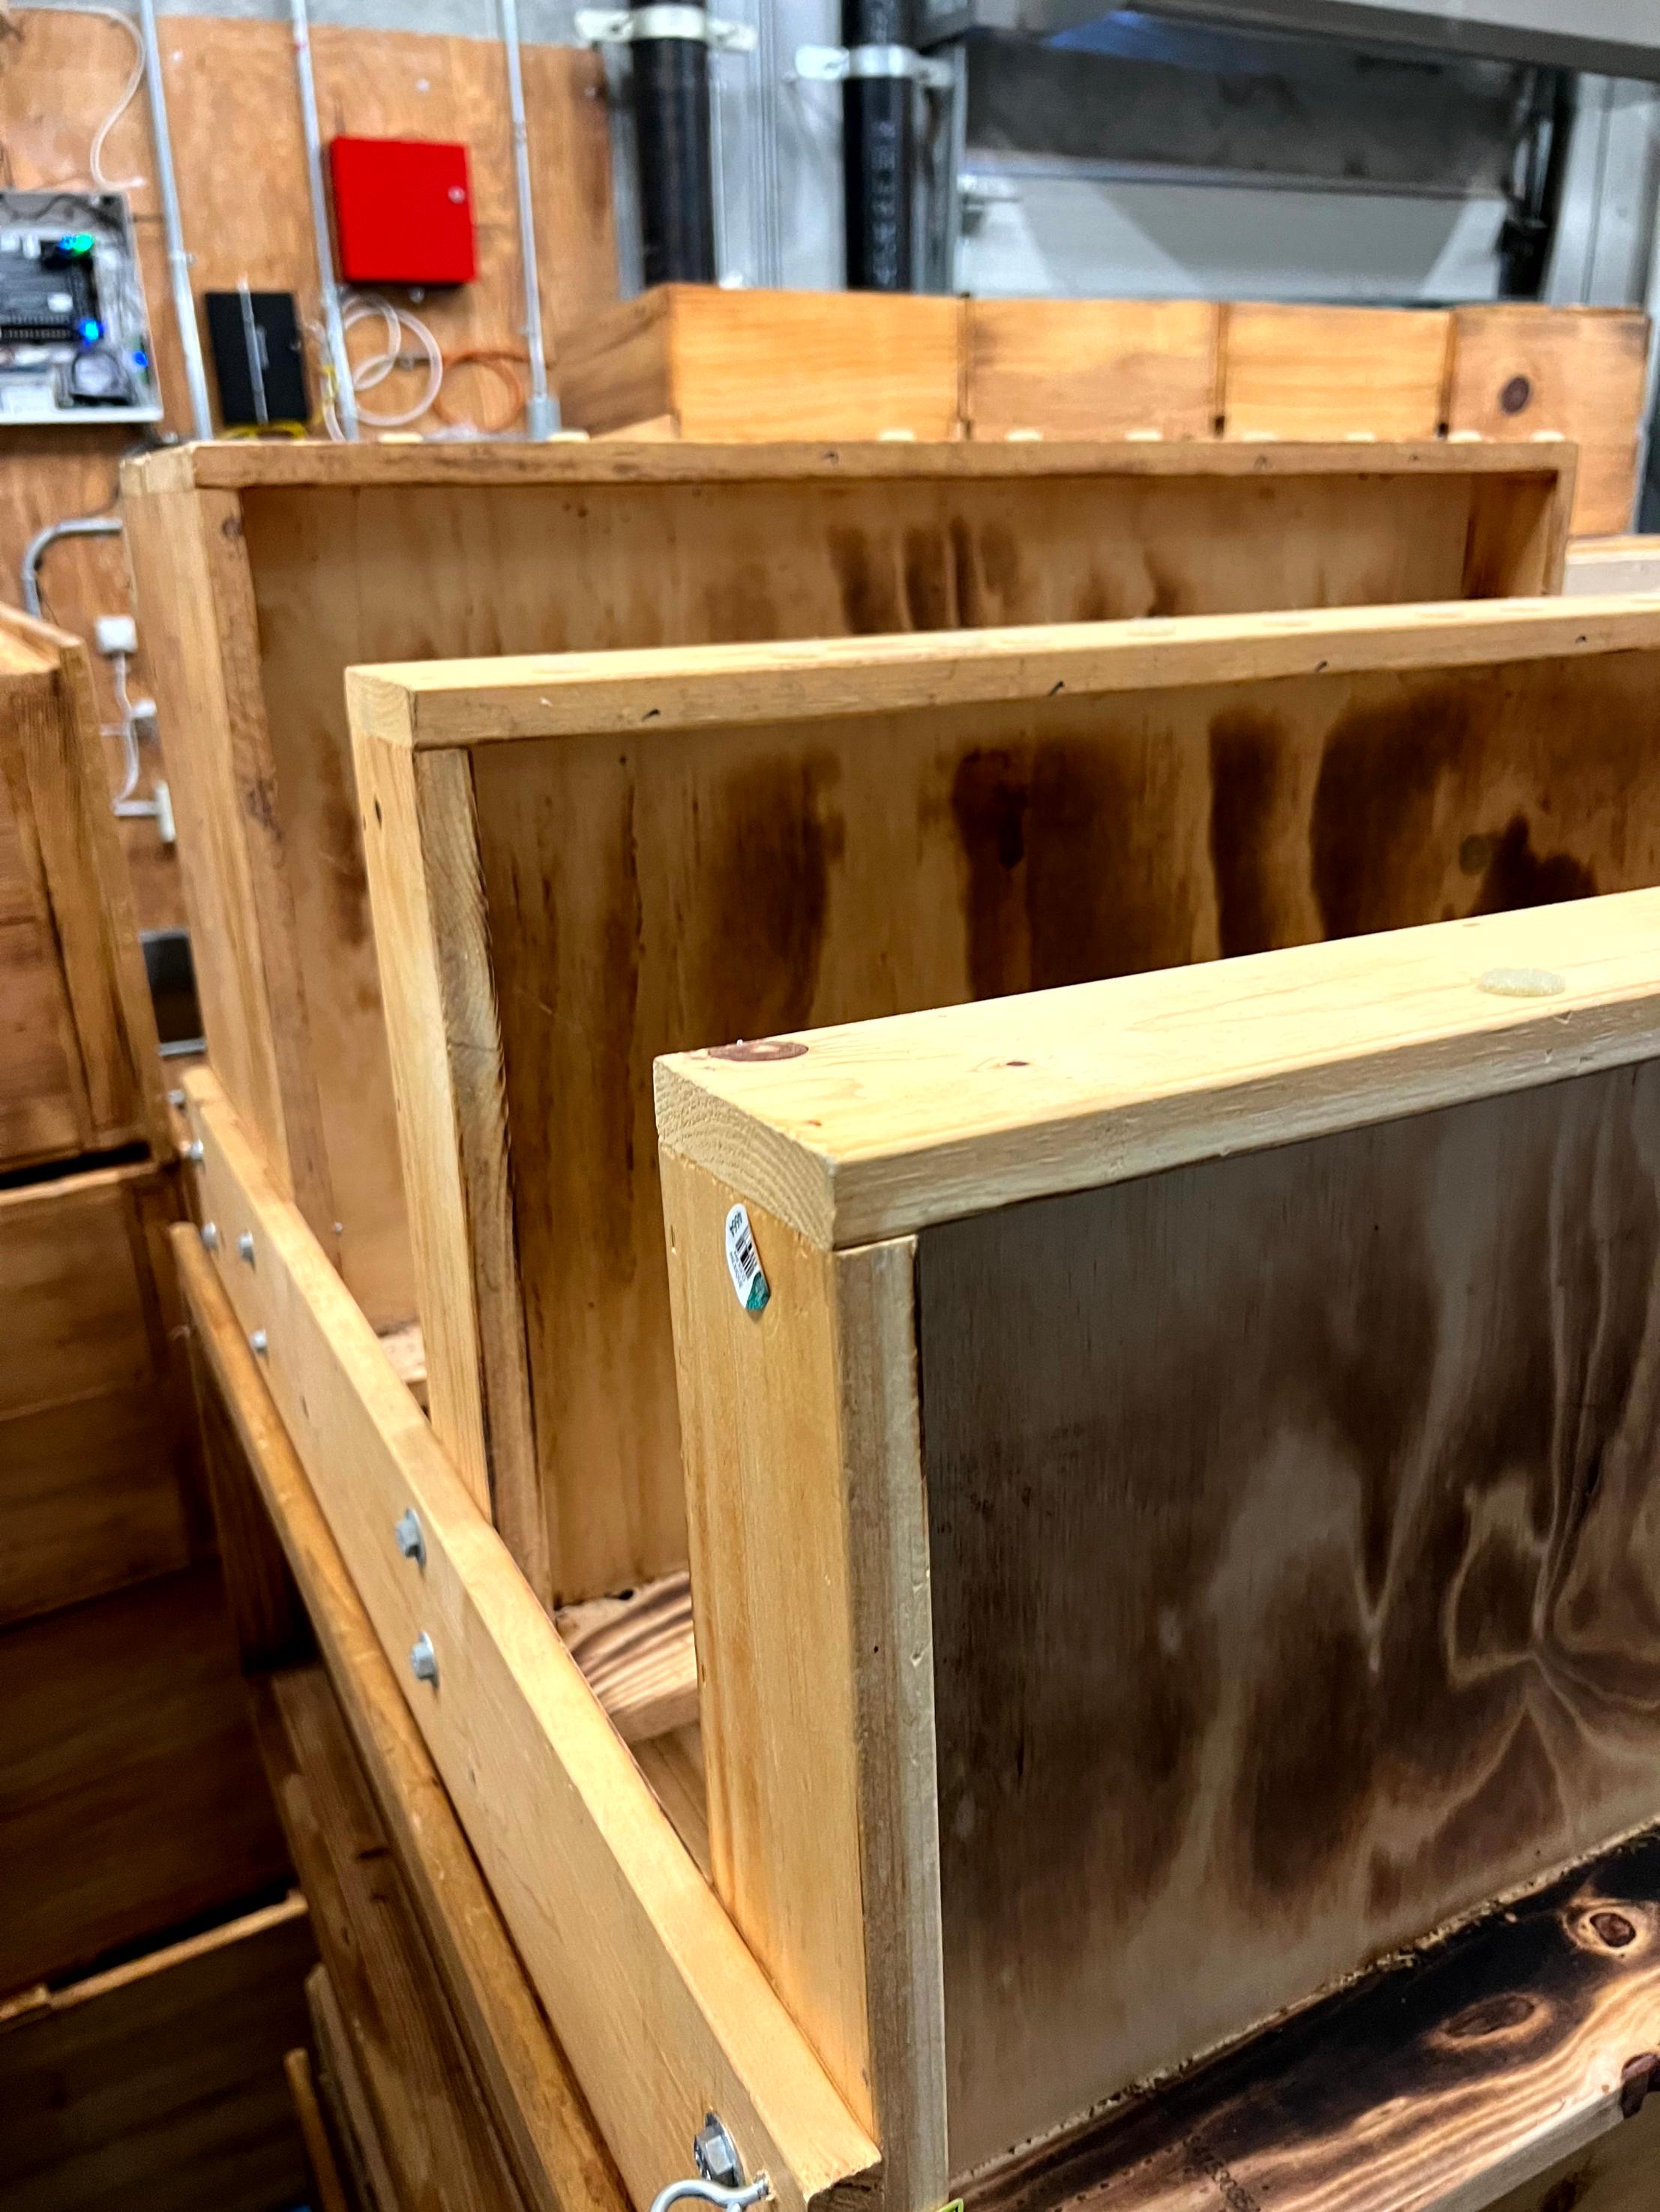 Pallet of Wood Crates and Displays